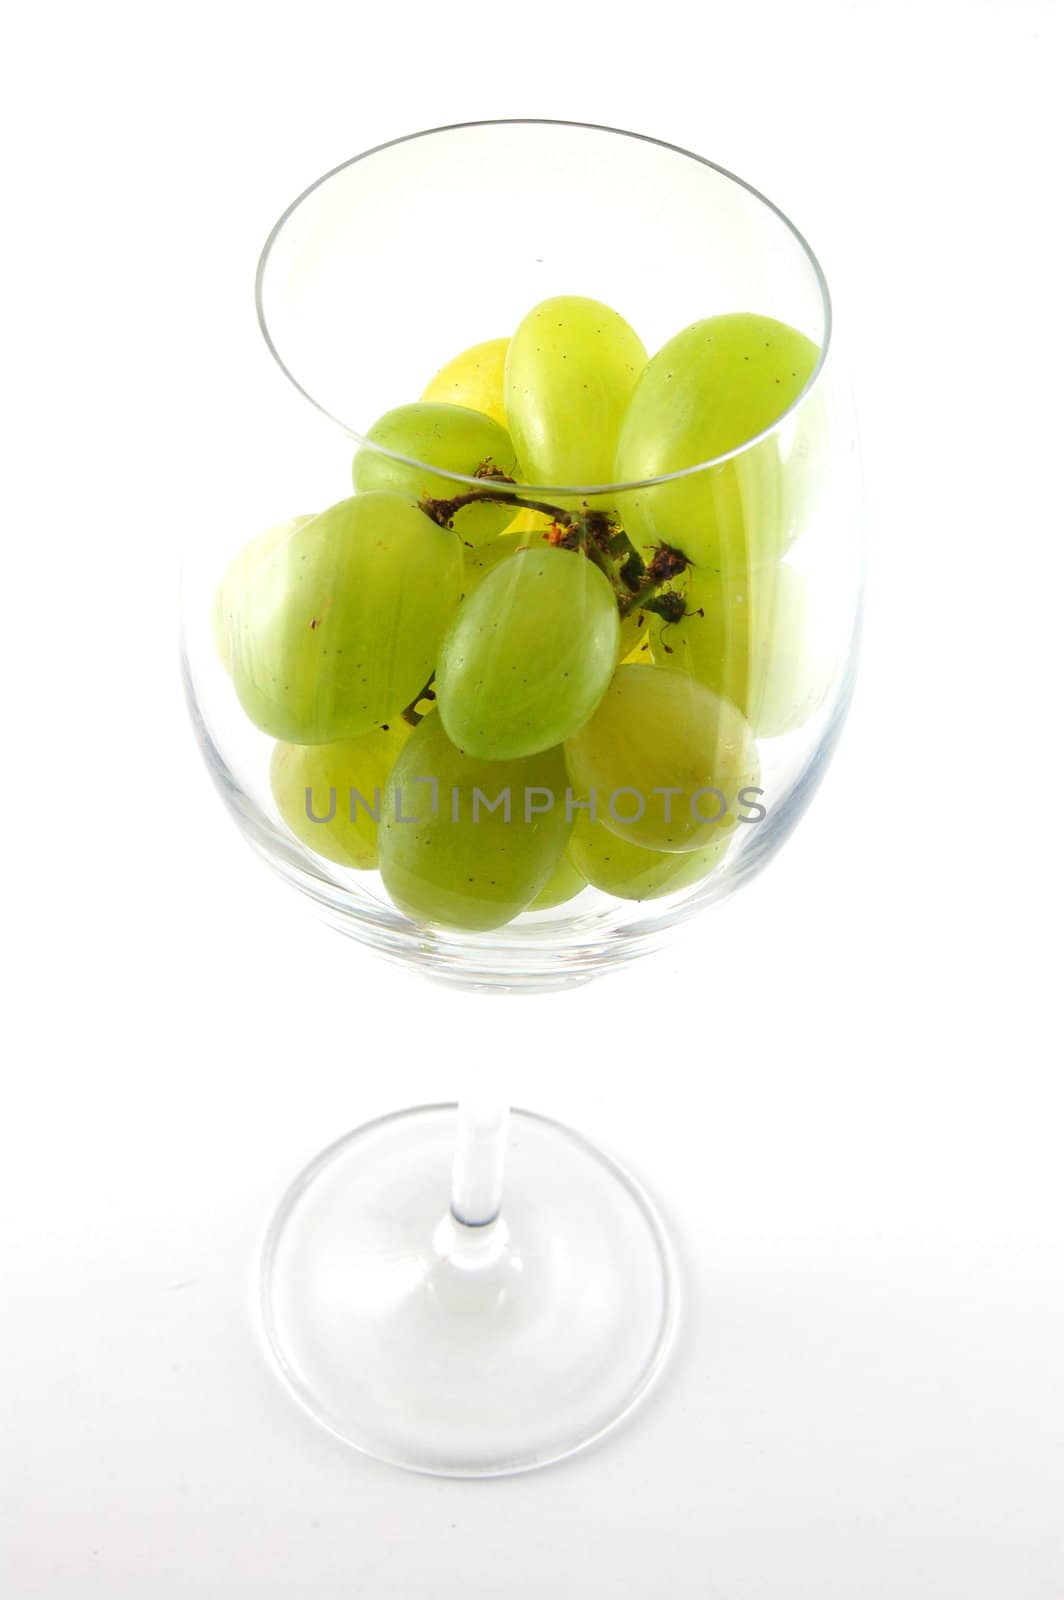 Its a grape in a glass isolated on white background.